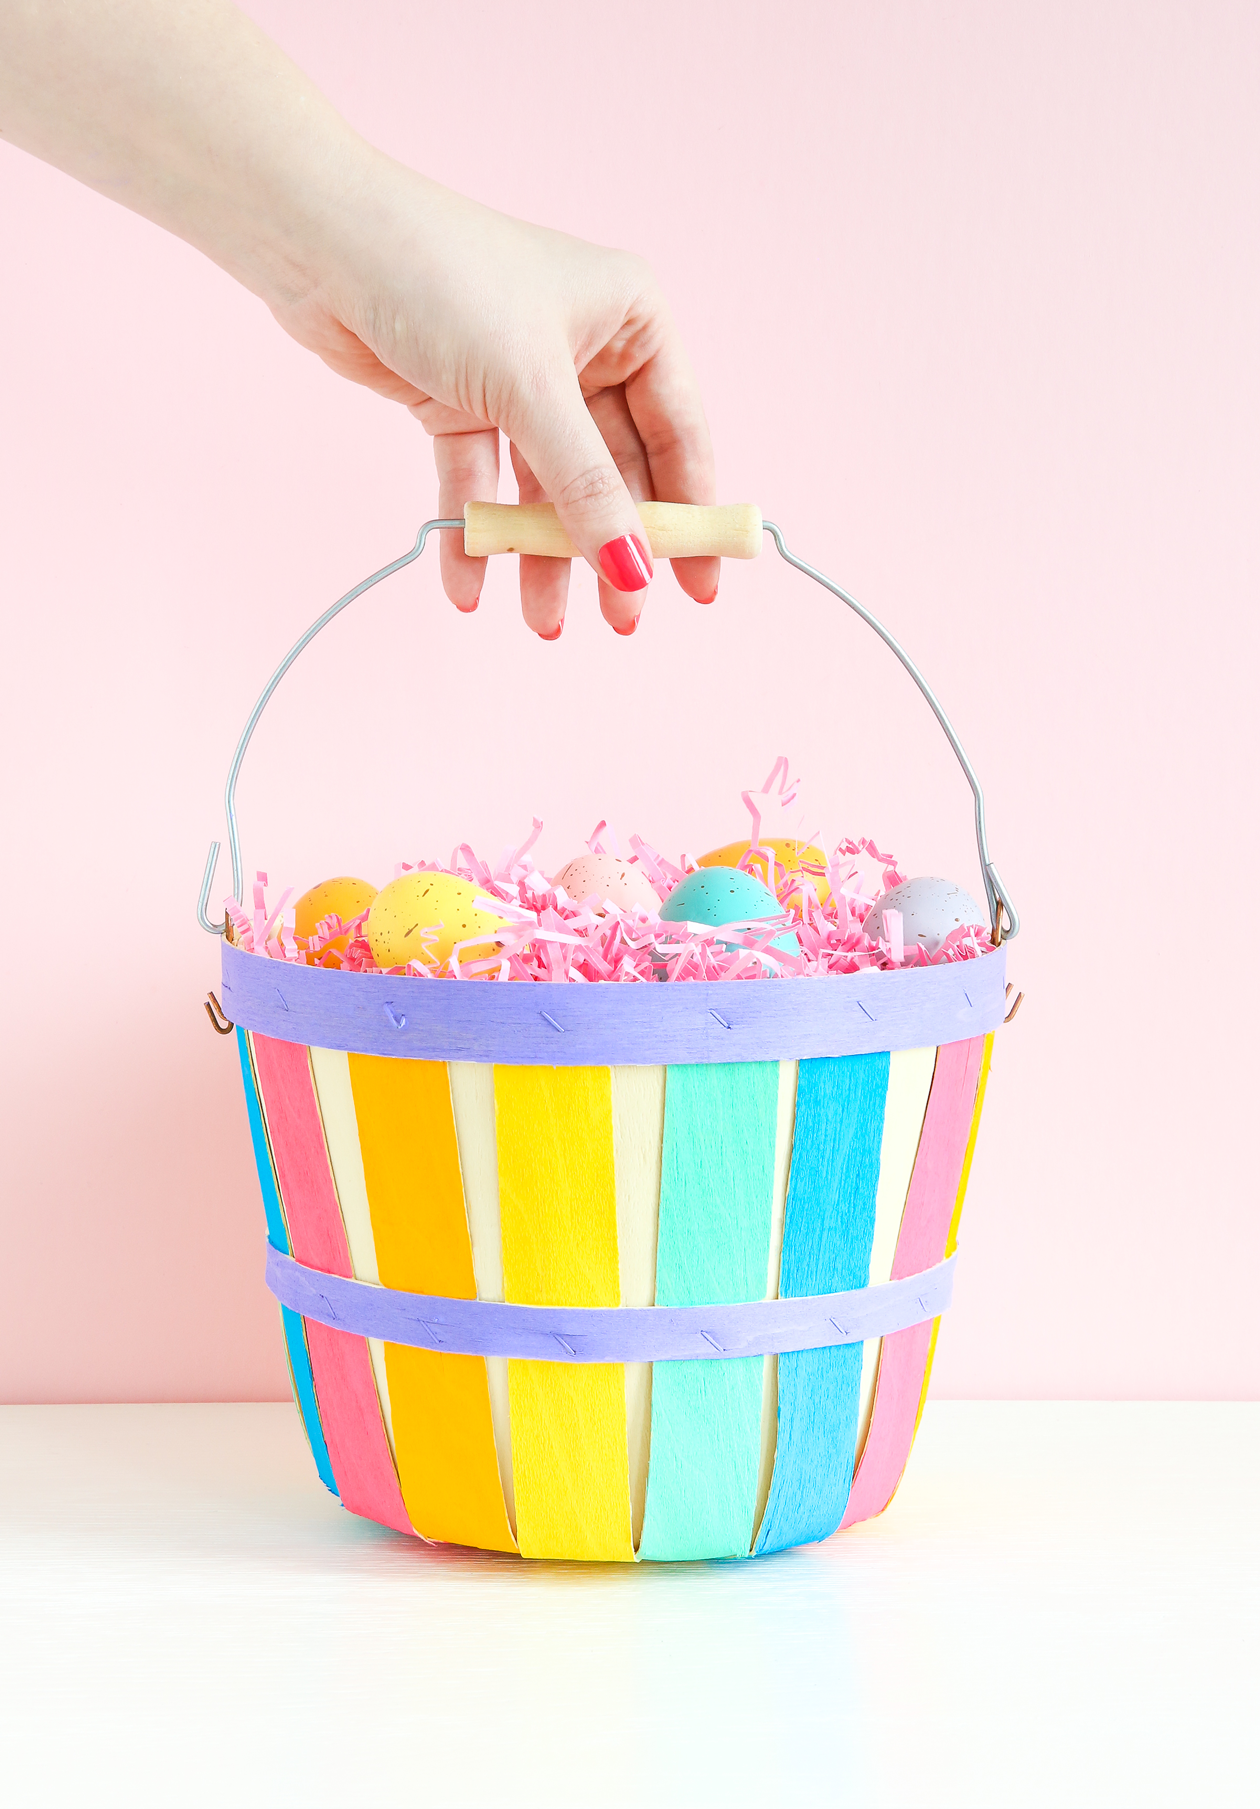 Add a colorful, handmade touch to your spring decor with this DIY Painted Easter Basket! Make your own custom Easter Basket with your kids or for yourself!